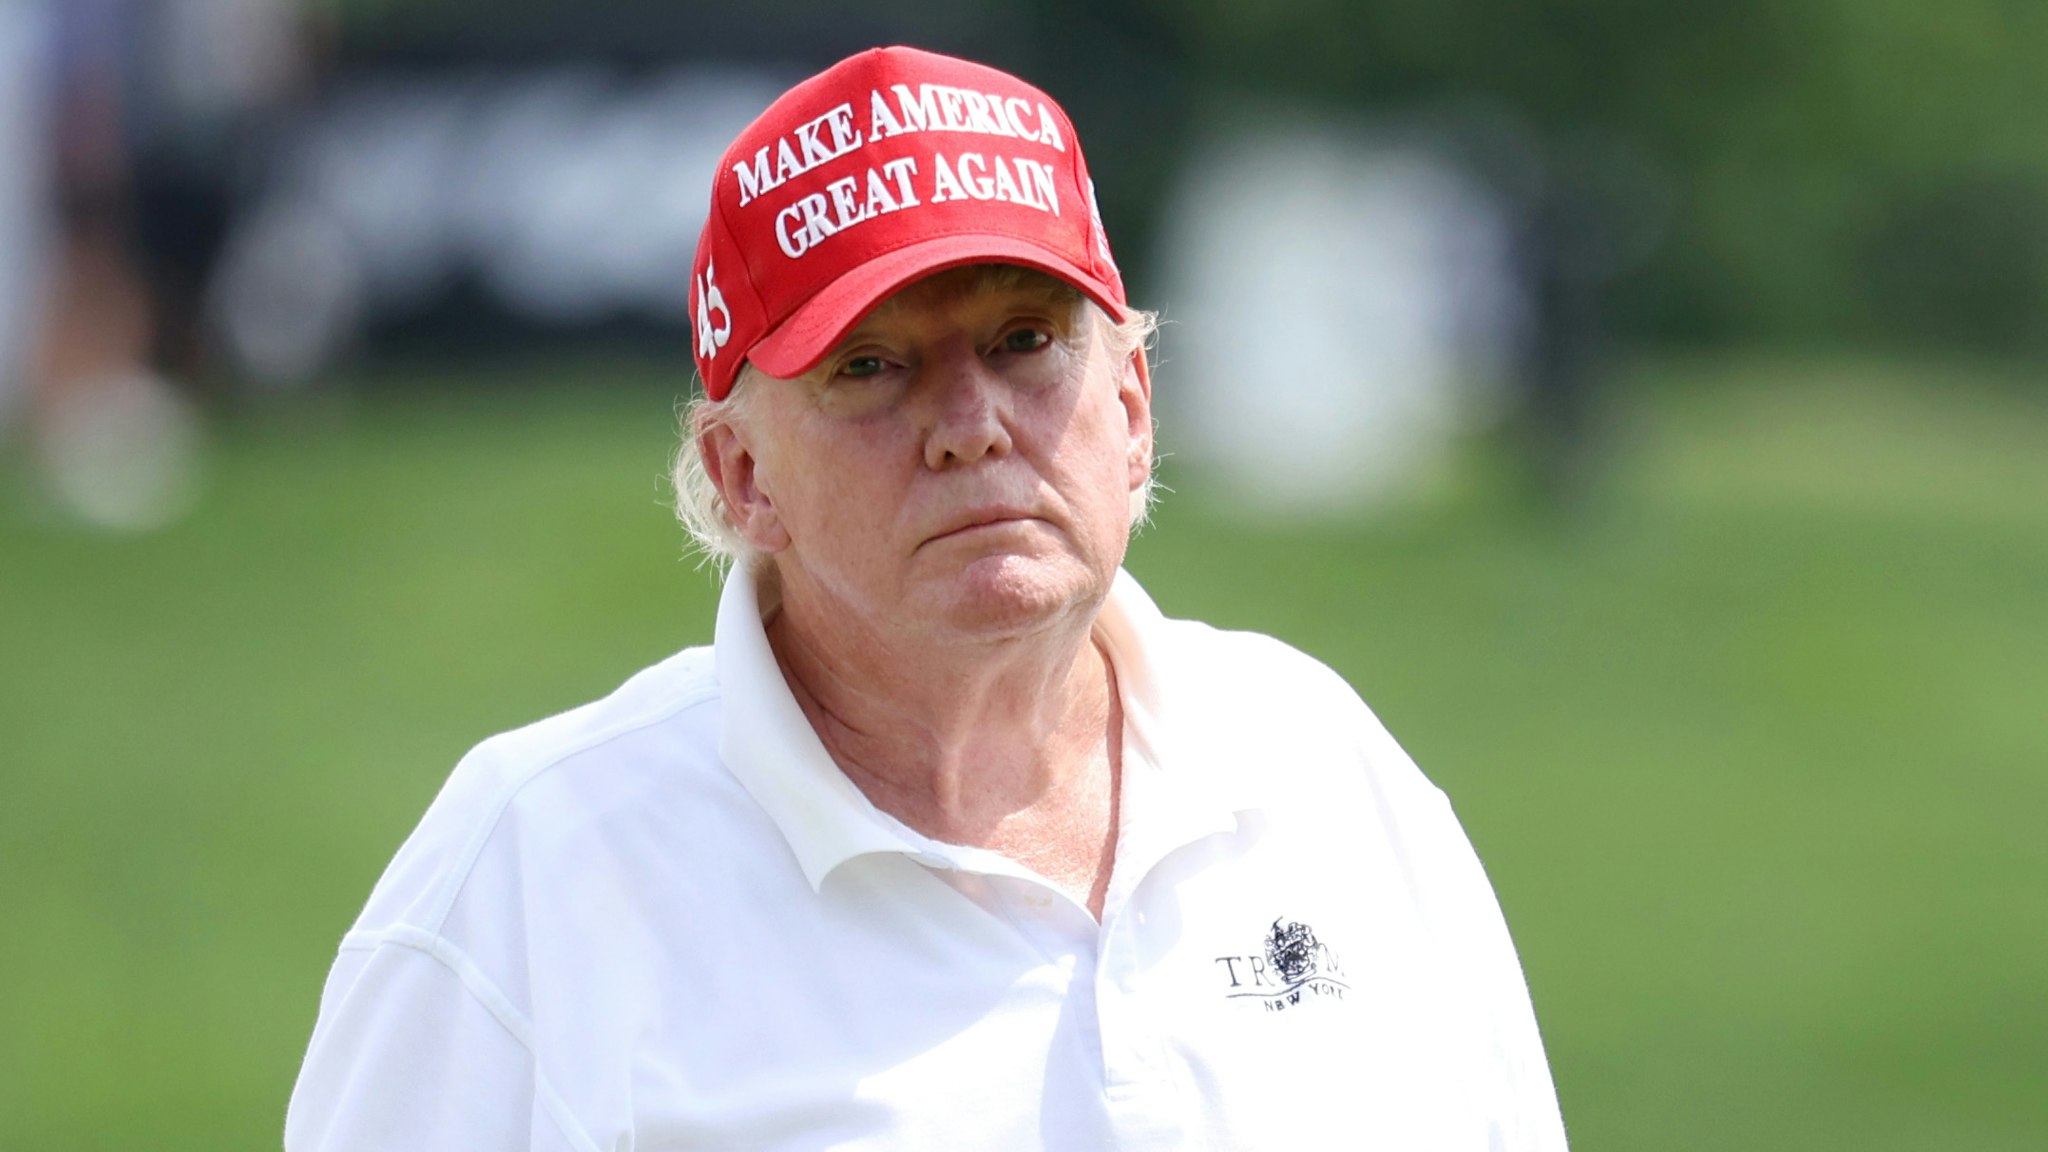 BEDMINSTER, NEW JERSEY - JULY 28: Former U.S. President Donald Trump looks on from the 18th hole during the pro-am prior to the LIV Golf Invitational - Bedminster at Trump National Golf Club Bedminster on July 28, 2022 in Bedminster, New Jersey.